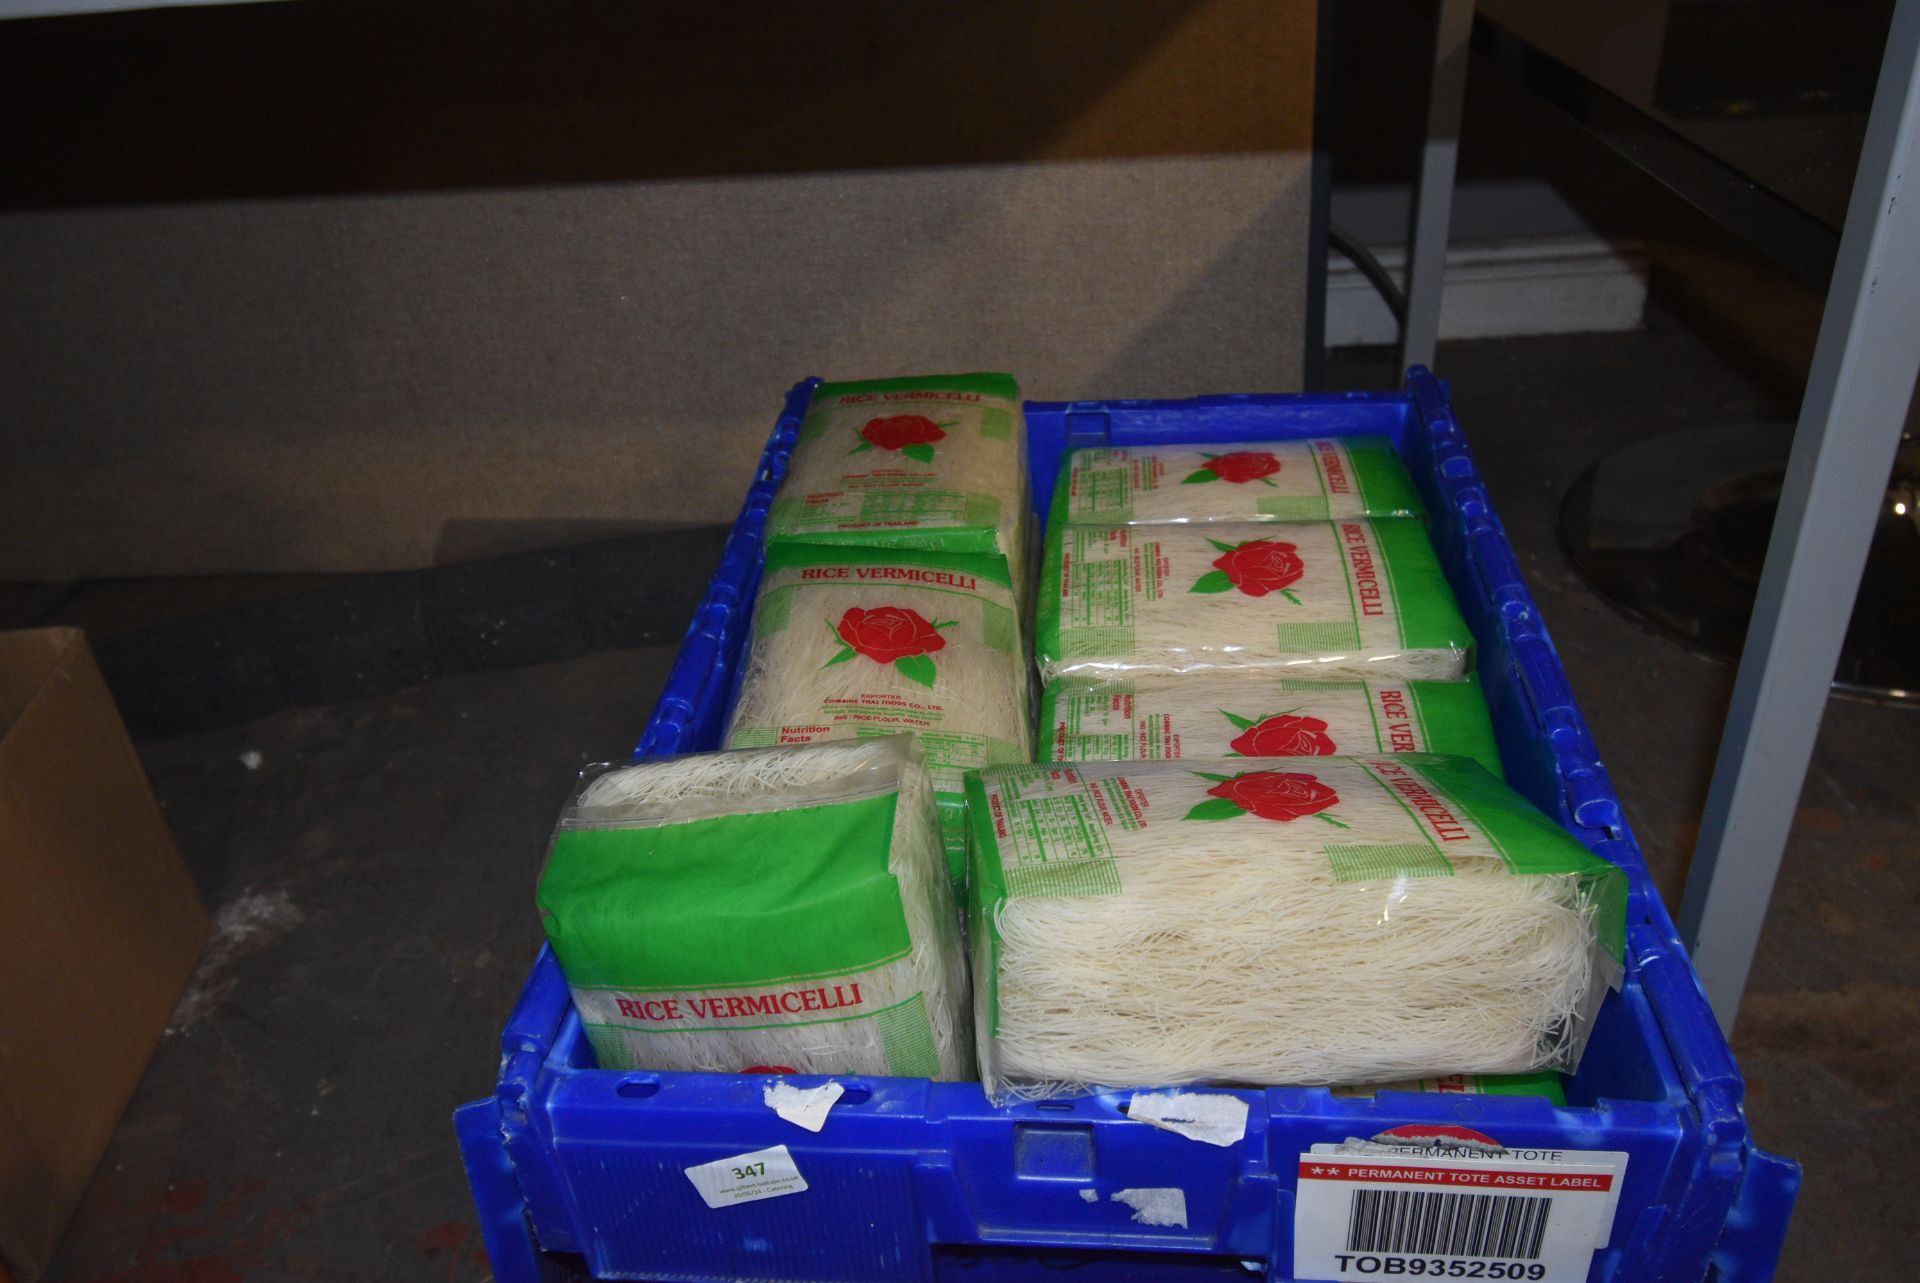 ~24 Bags of Rice Vermicelli